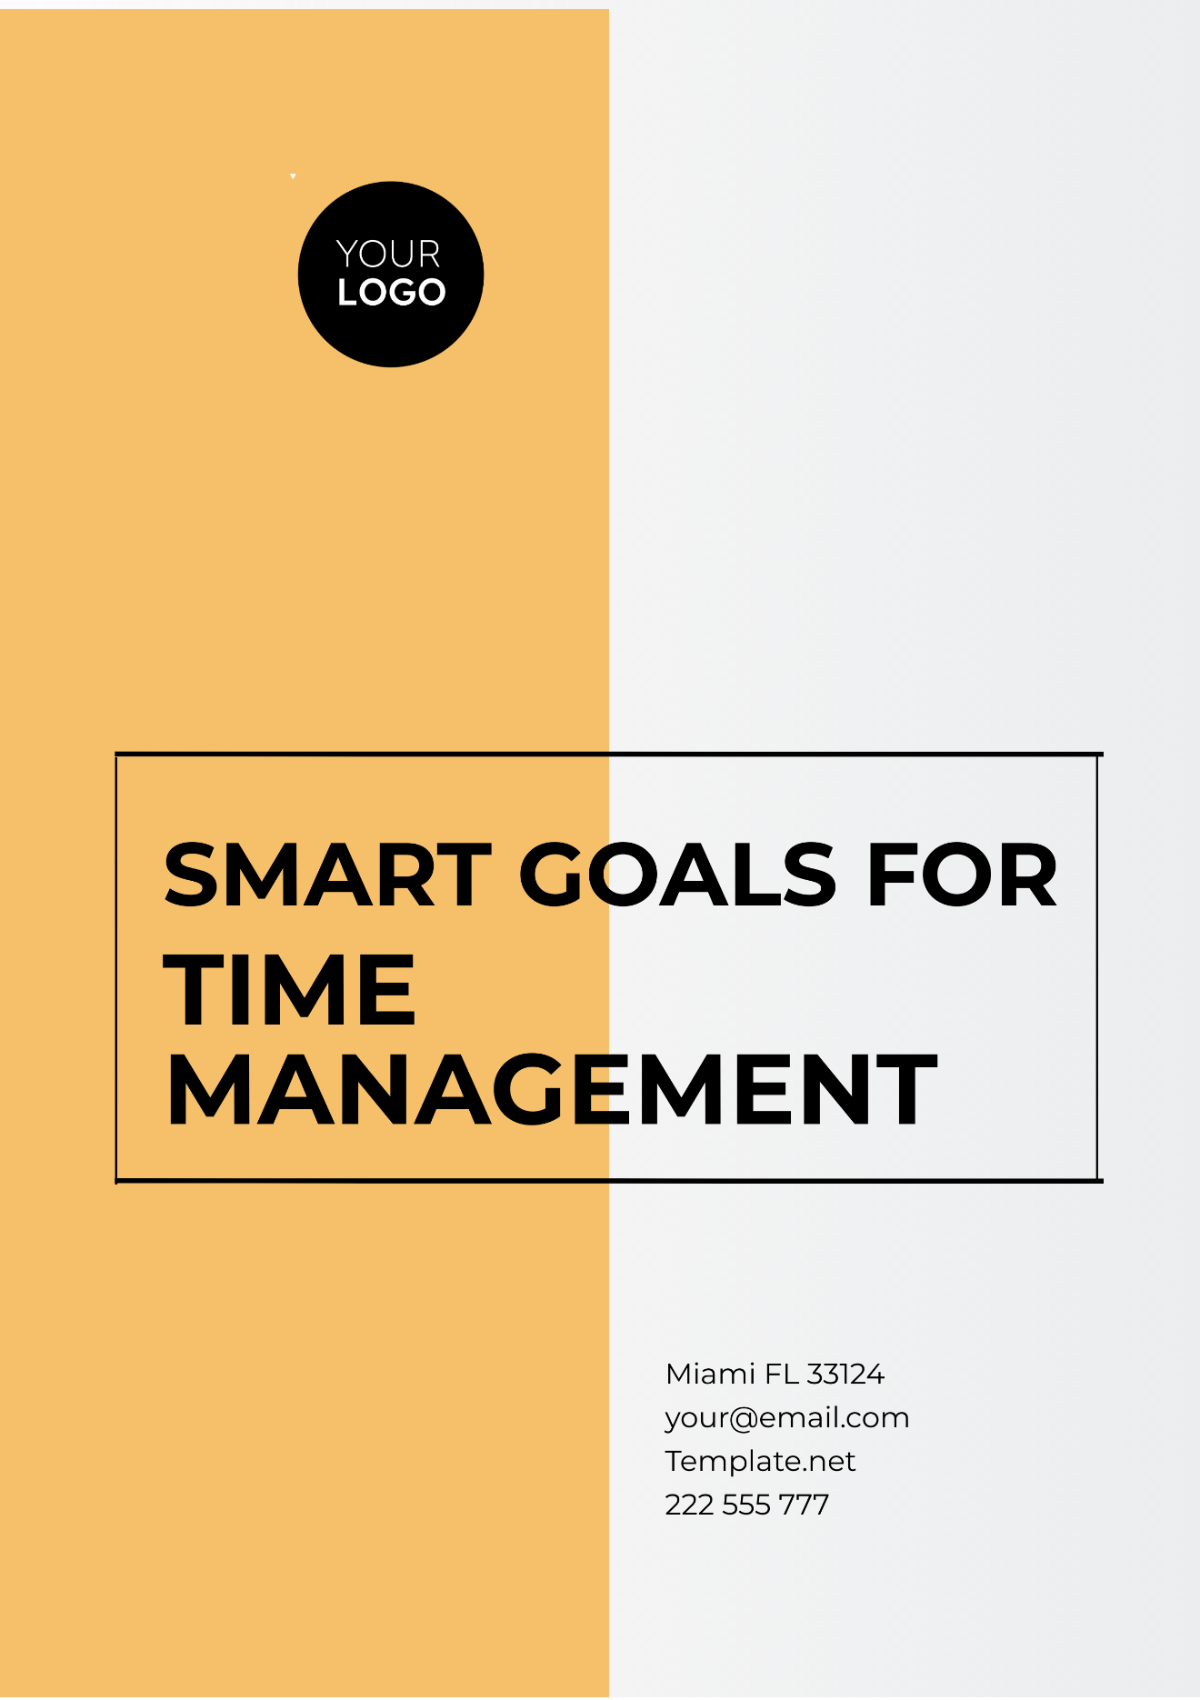 SMART Goals for Time Management Template